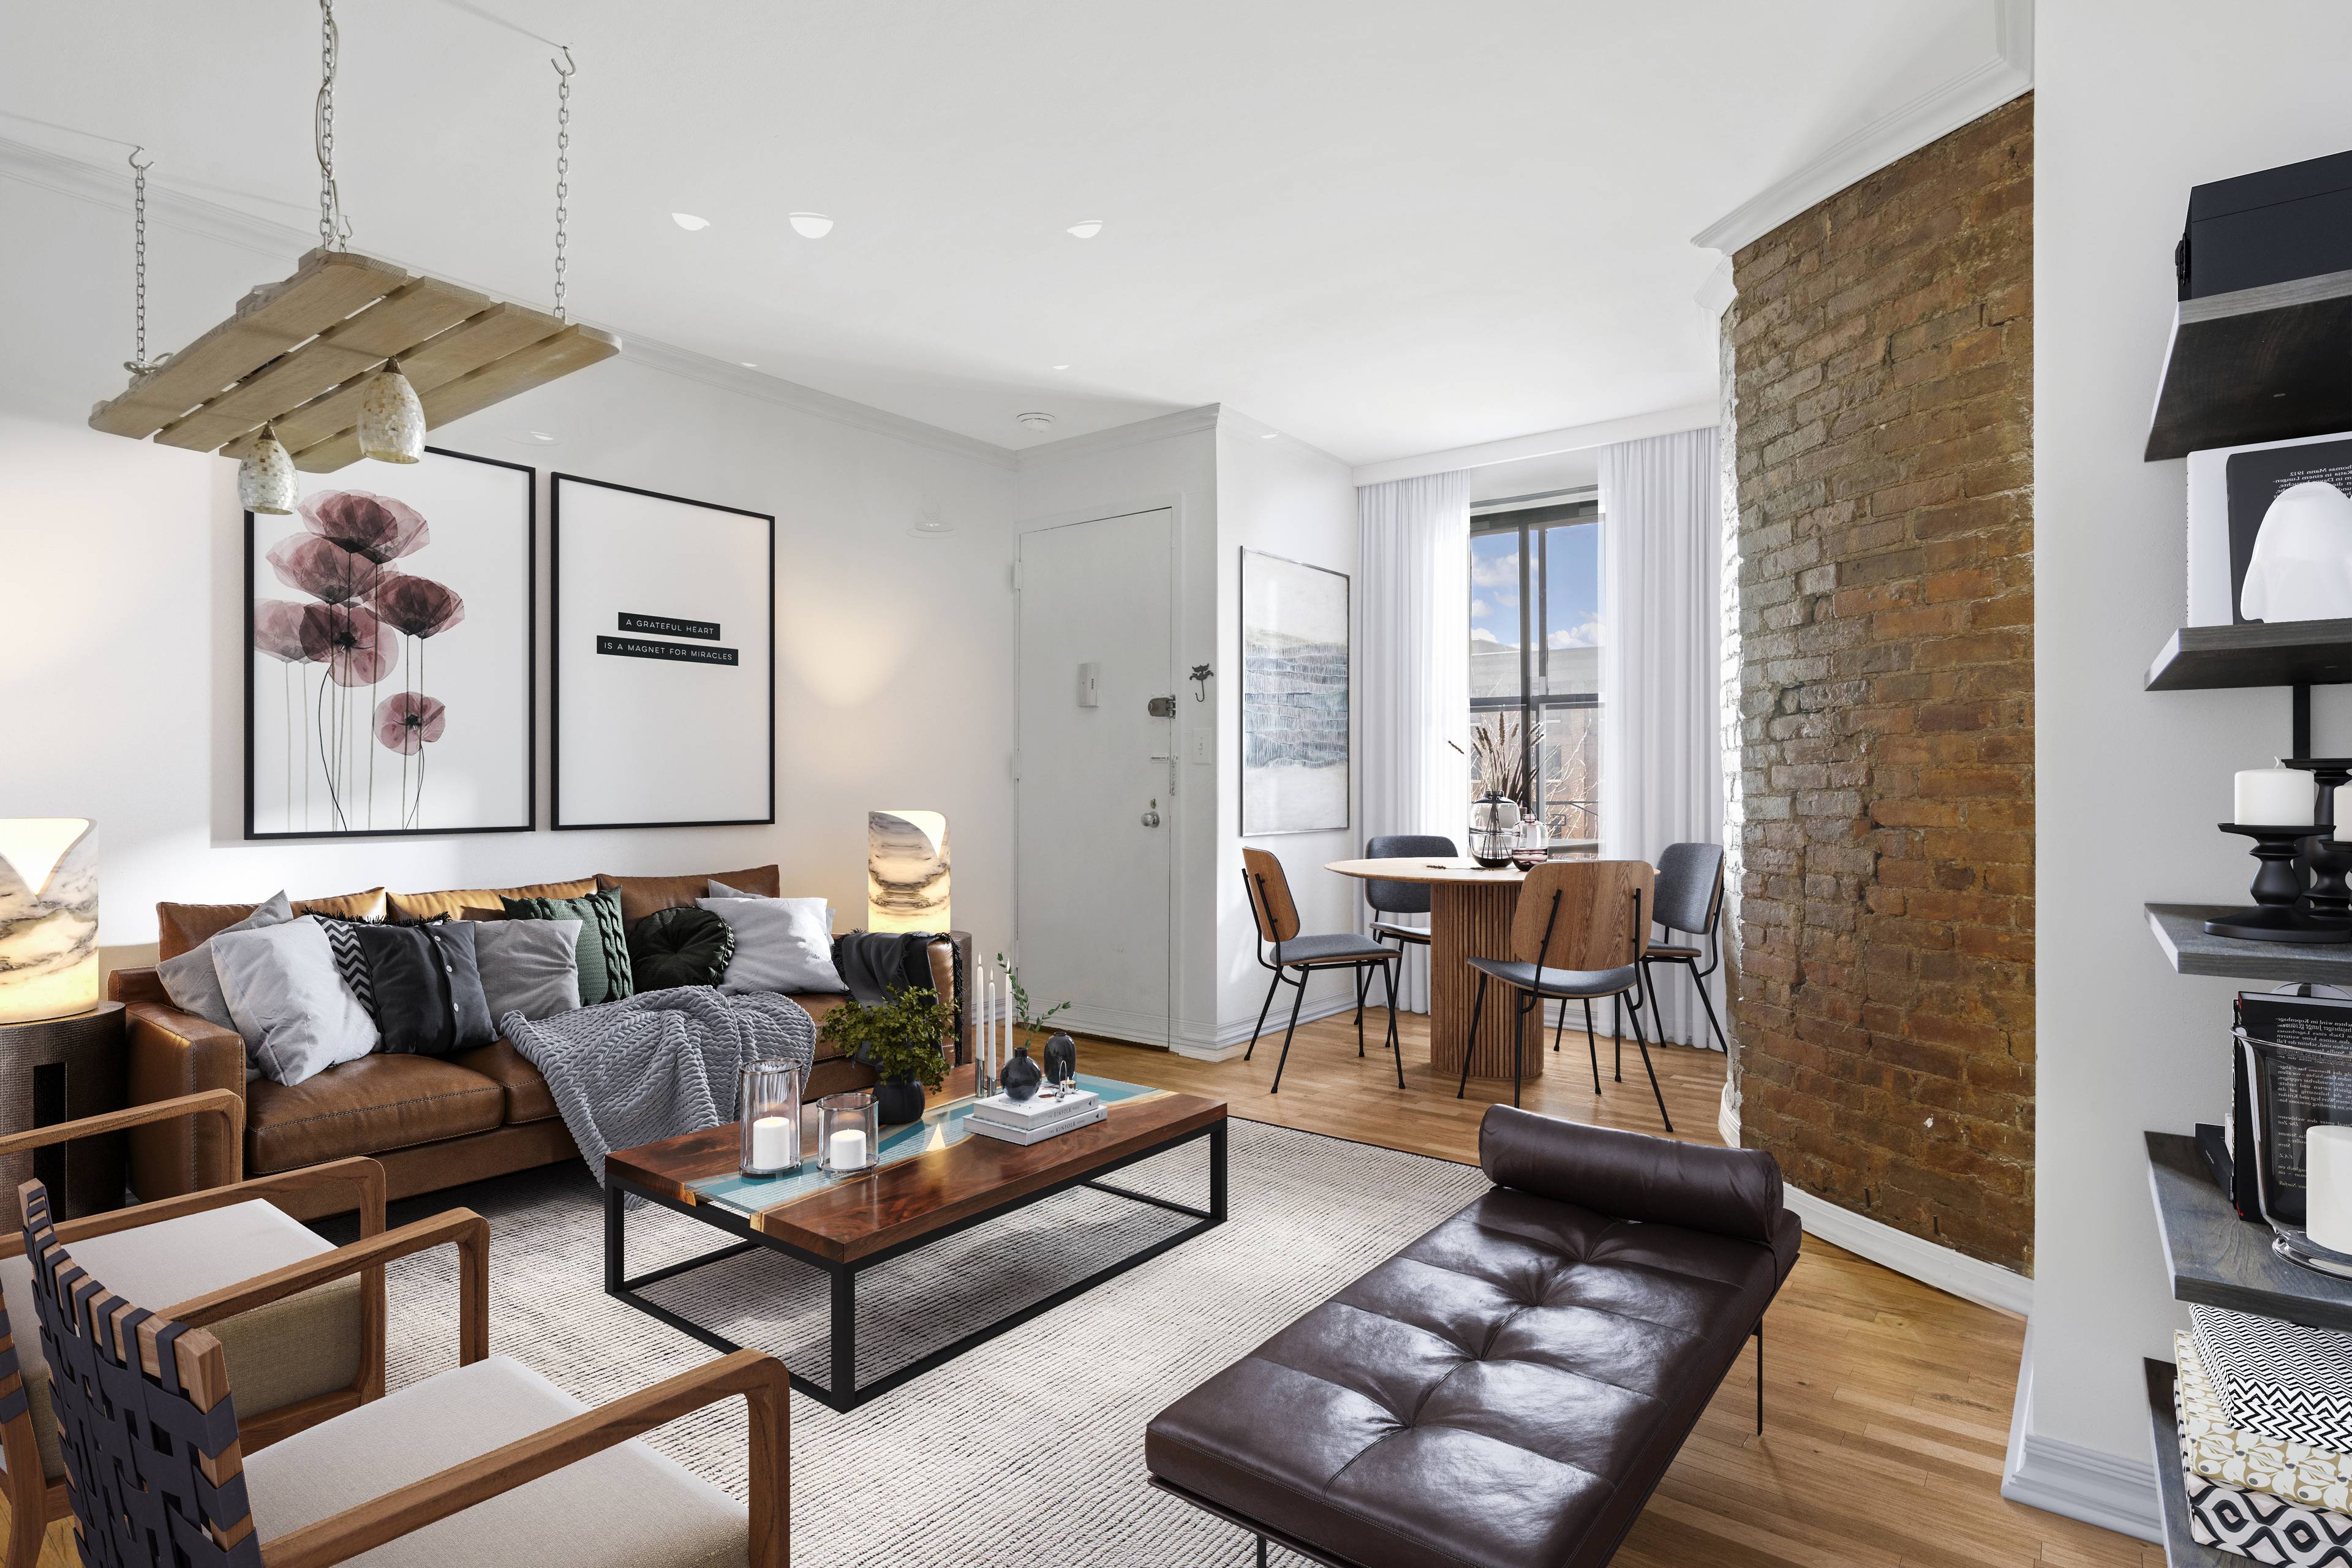 Cobble Hill Pre War Condo Expansive 1BD 1BA with Sprawling Hardwood Floors, Exposed Brick, King Size Bedroom, Open Kitchen with Stainless Steel Appliances including a Dishwasher, Microwave, and Gas Stove, ...